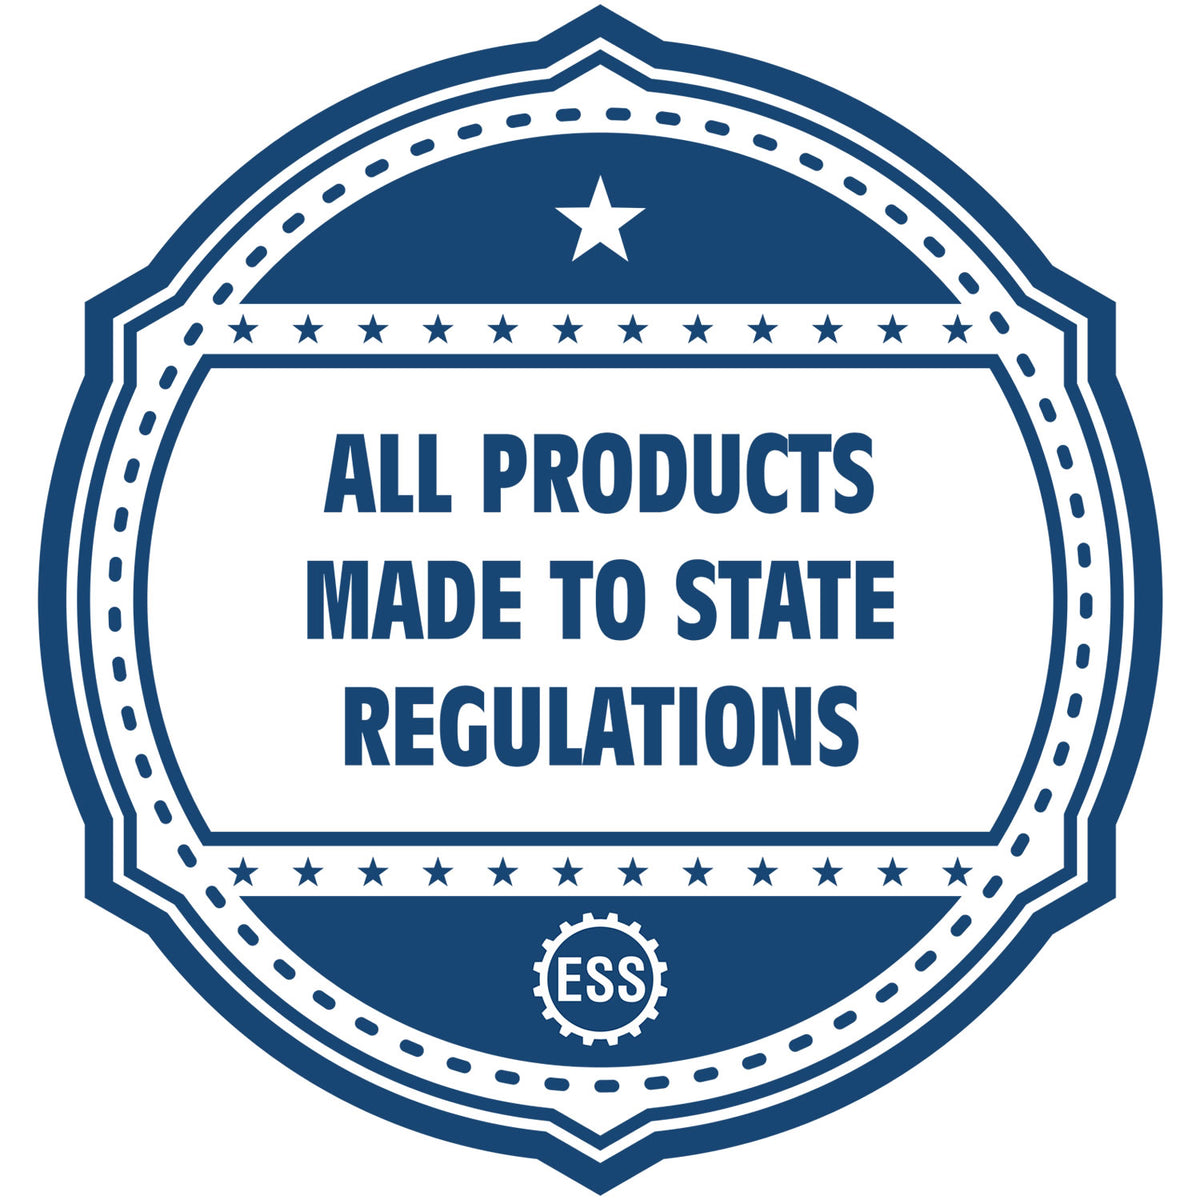 An icon or badge element for the Self-Inking West Virginia Landscape Architect Stamp showing that this product is made in compliance with state regulations.